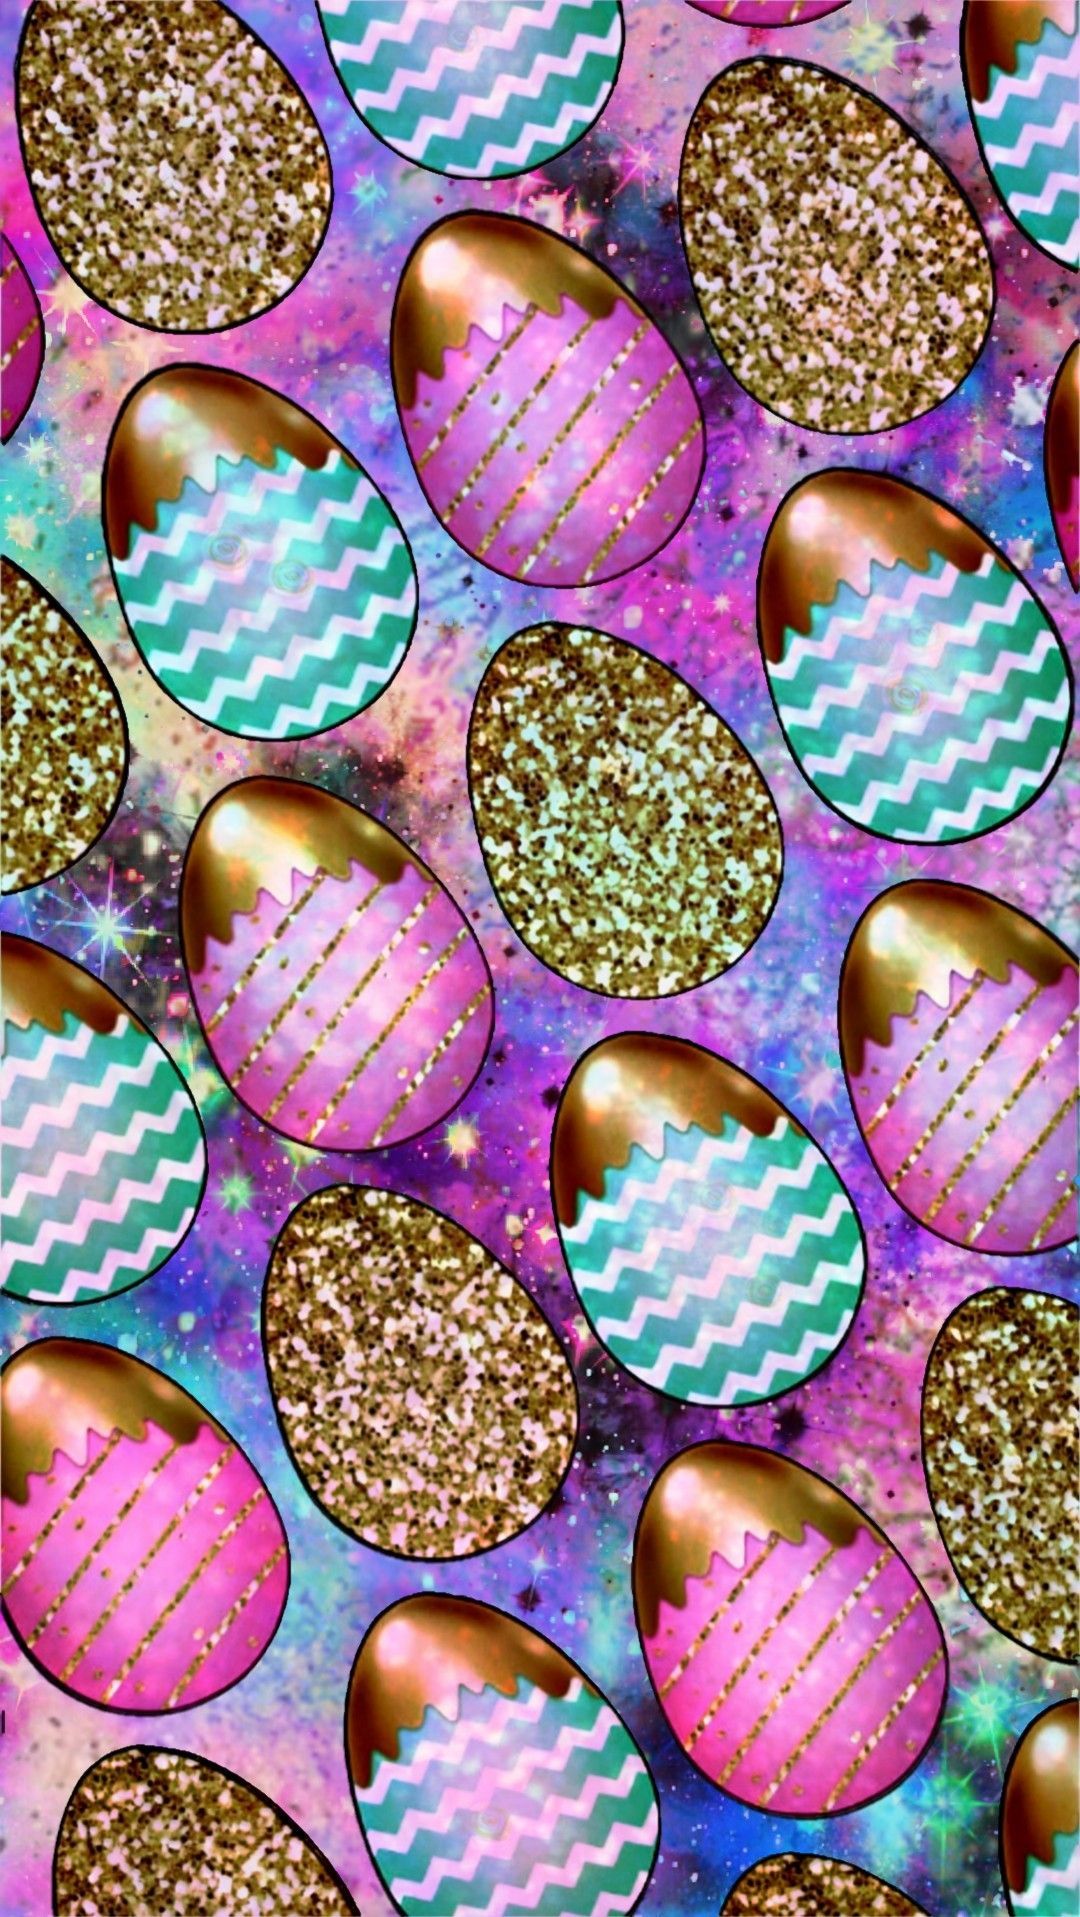 Galaxy Easter Eggs, made by me #patterns #colorful #glitter #background # wallpaper #sparkles #glittery #galaxy #ea. Easter wallpaper, Jesus wallpaper, Wallpaper